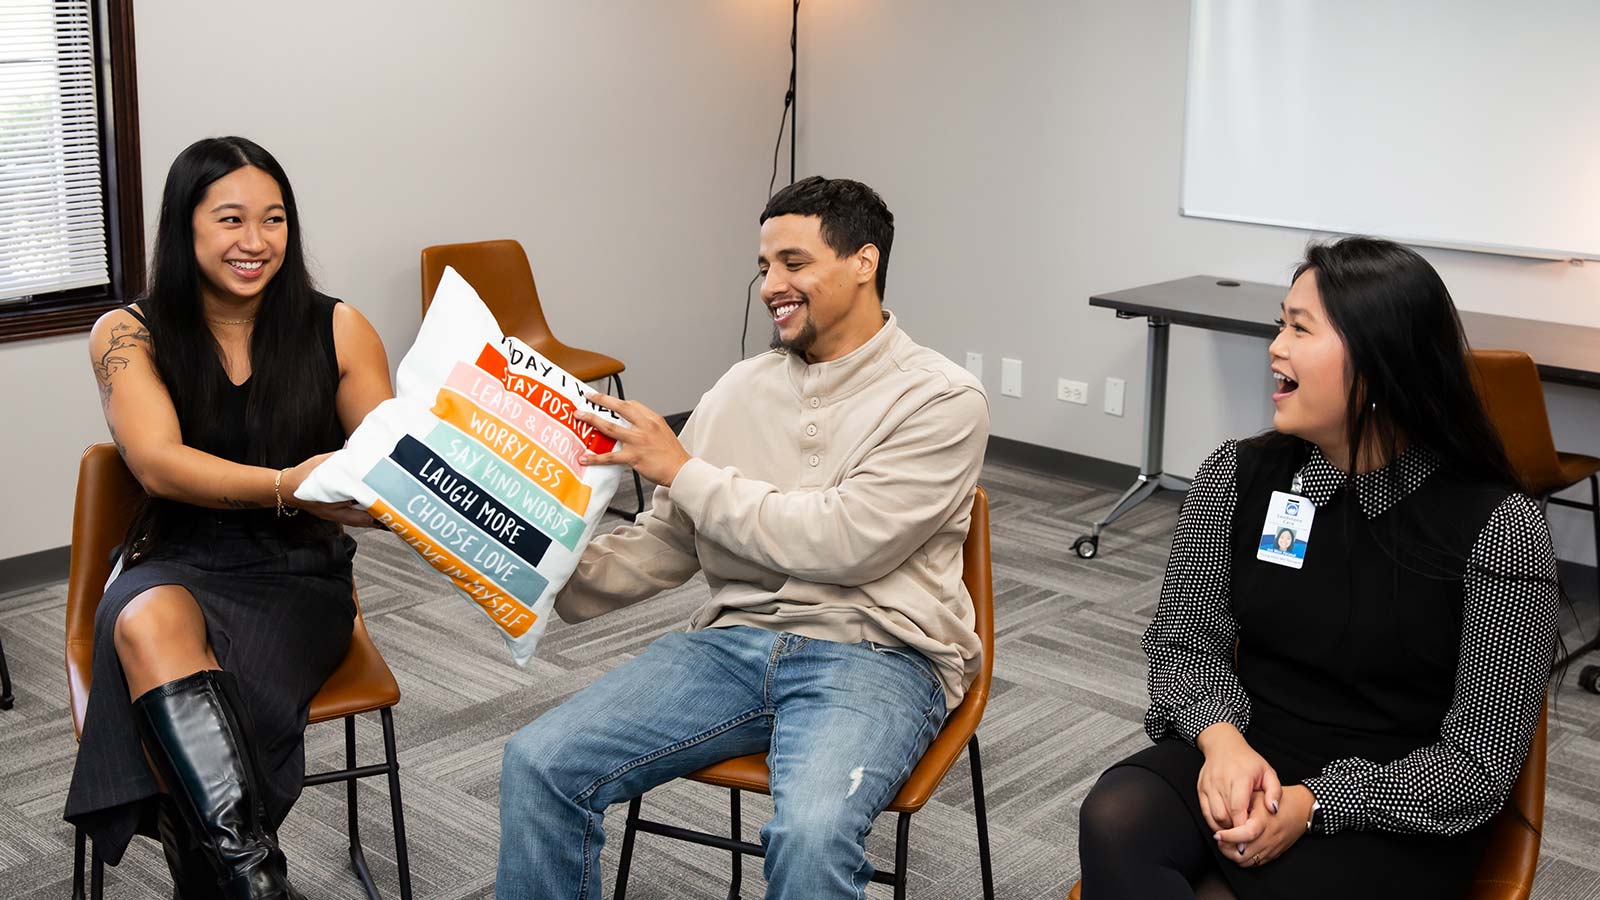 A person holding a motivational pillow laughs with others in a light-filled group room.